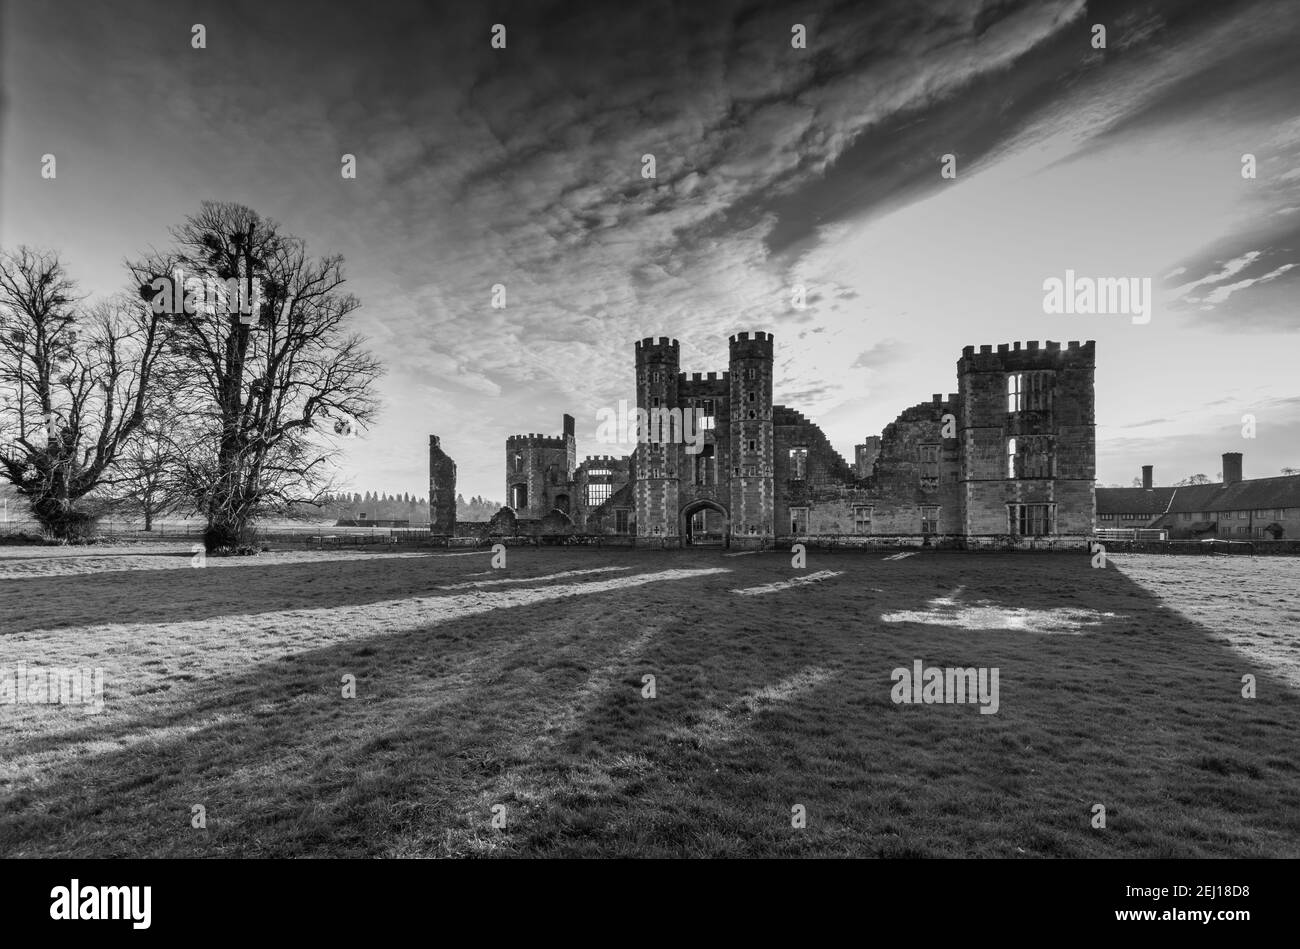 The ruins of Cowdray House, Midhurst, West Sussex, UK Stock Photo